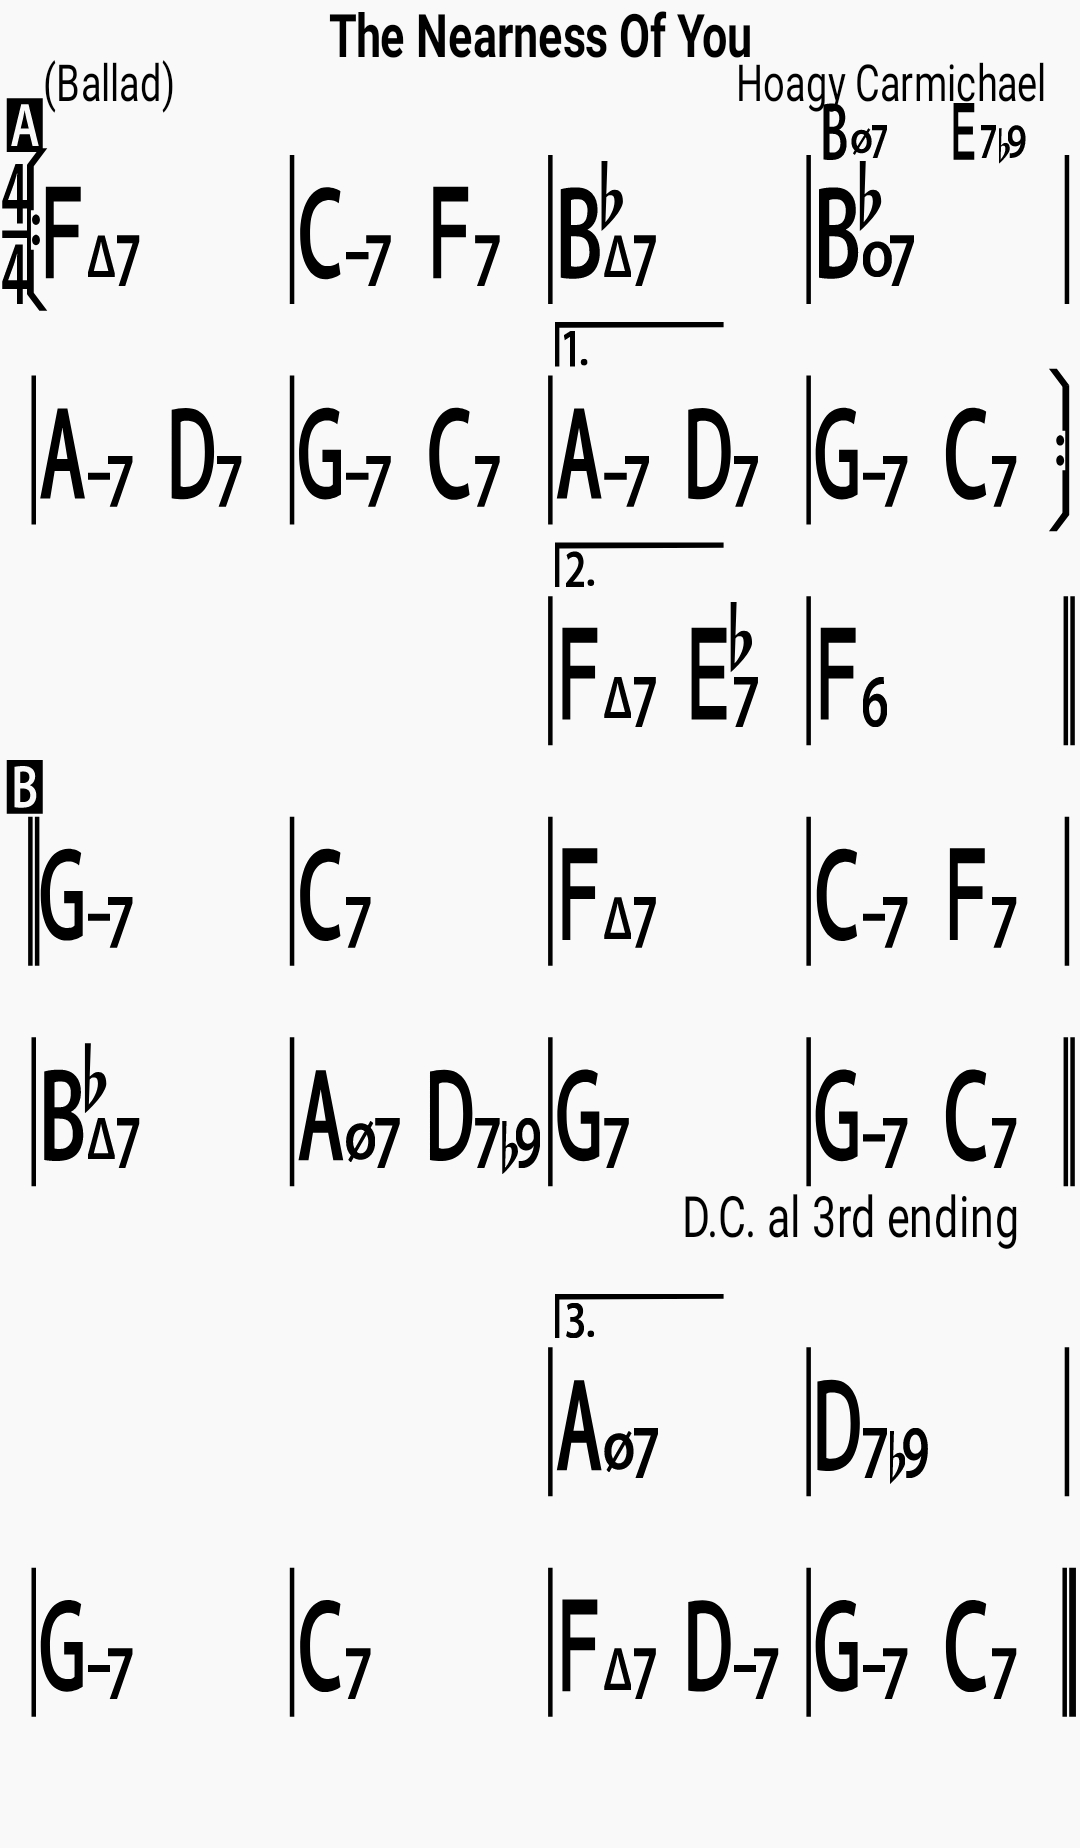 Chord chart for the jazz standard The Nearness Of You